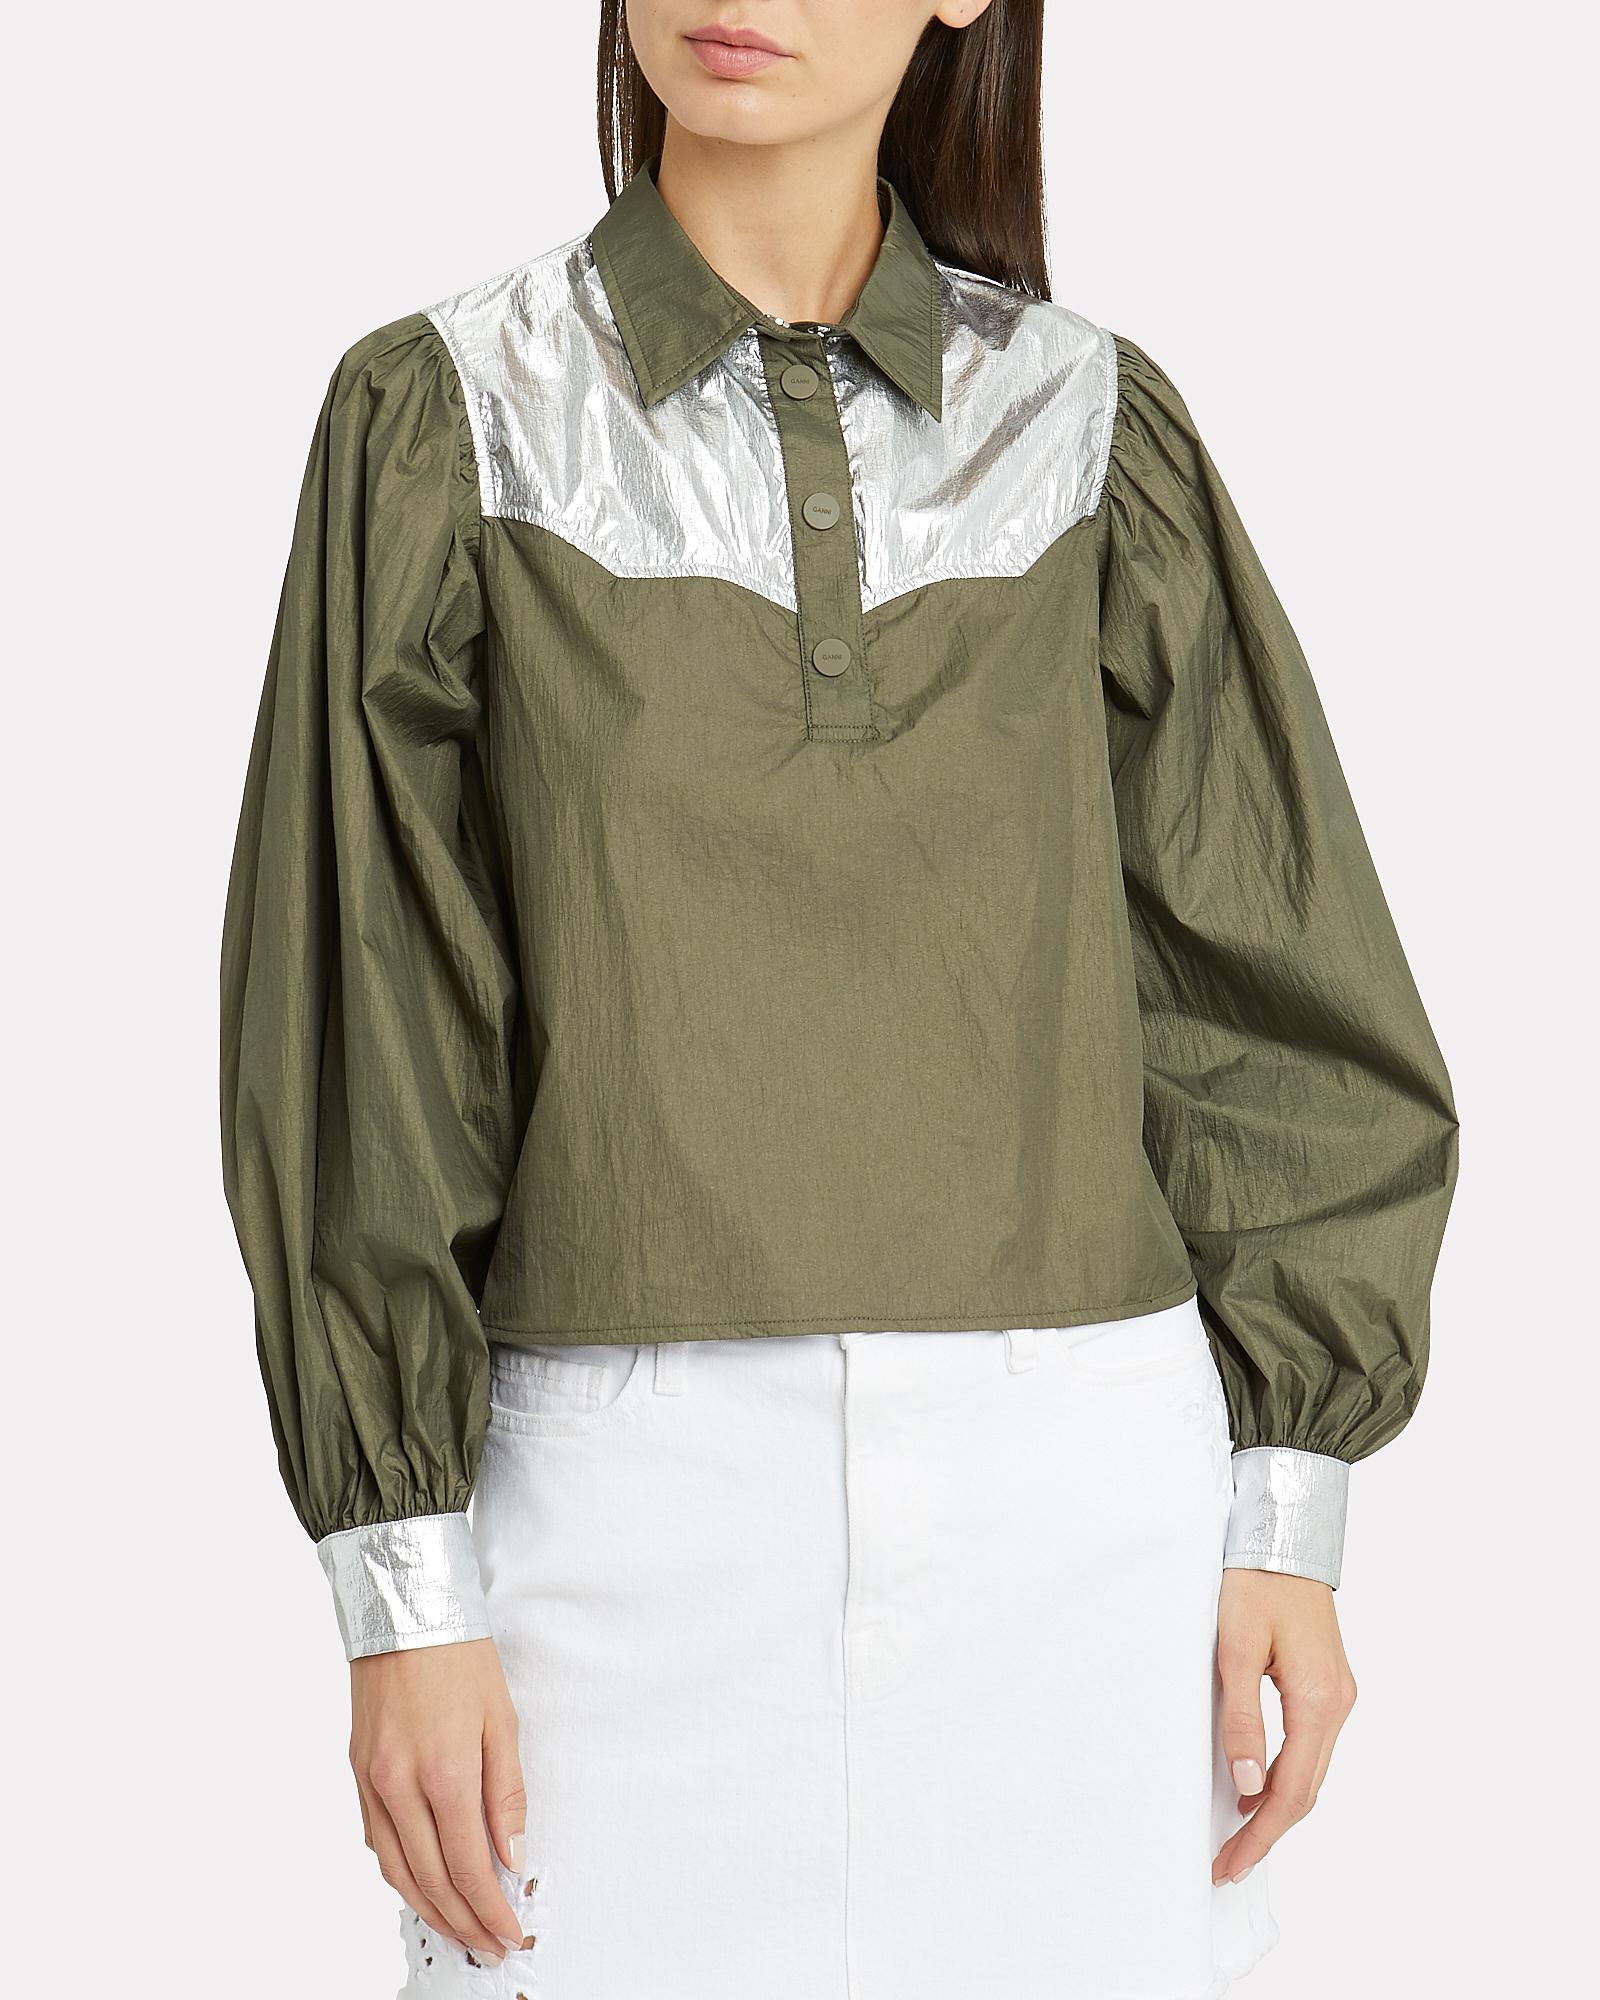 Ganni Synthetic Metallic Patch Shirt in Olive,Army (Green) - Lyst